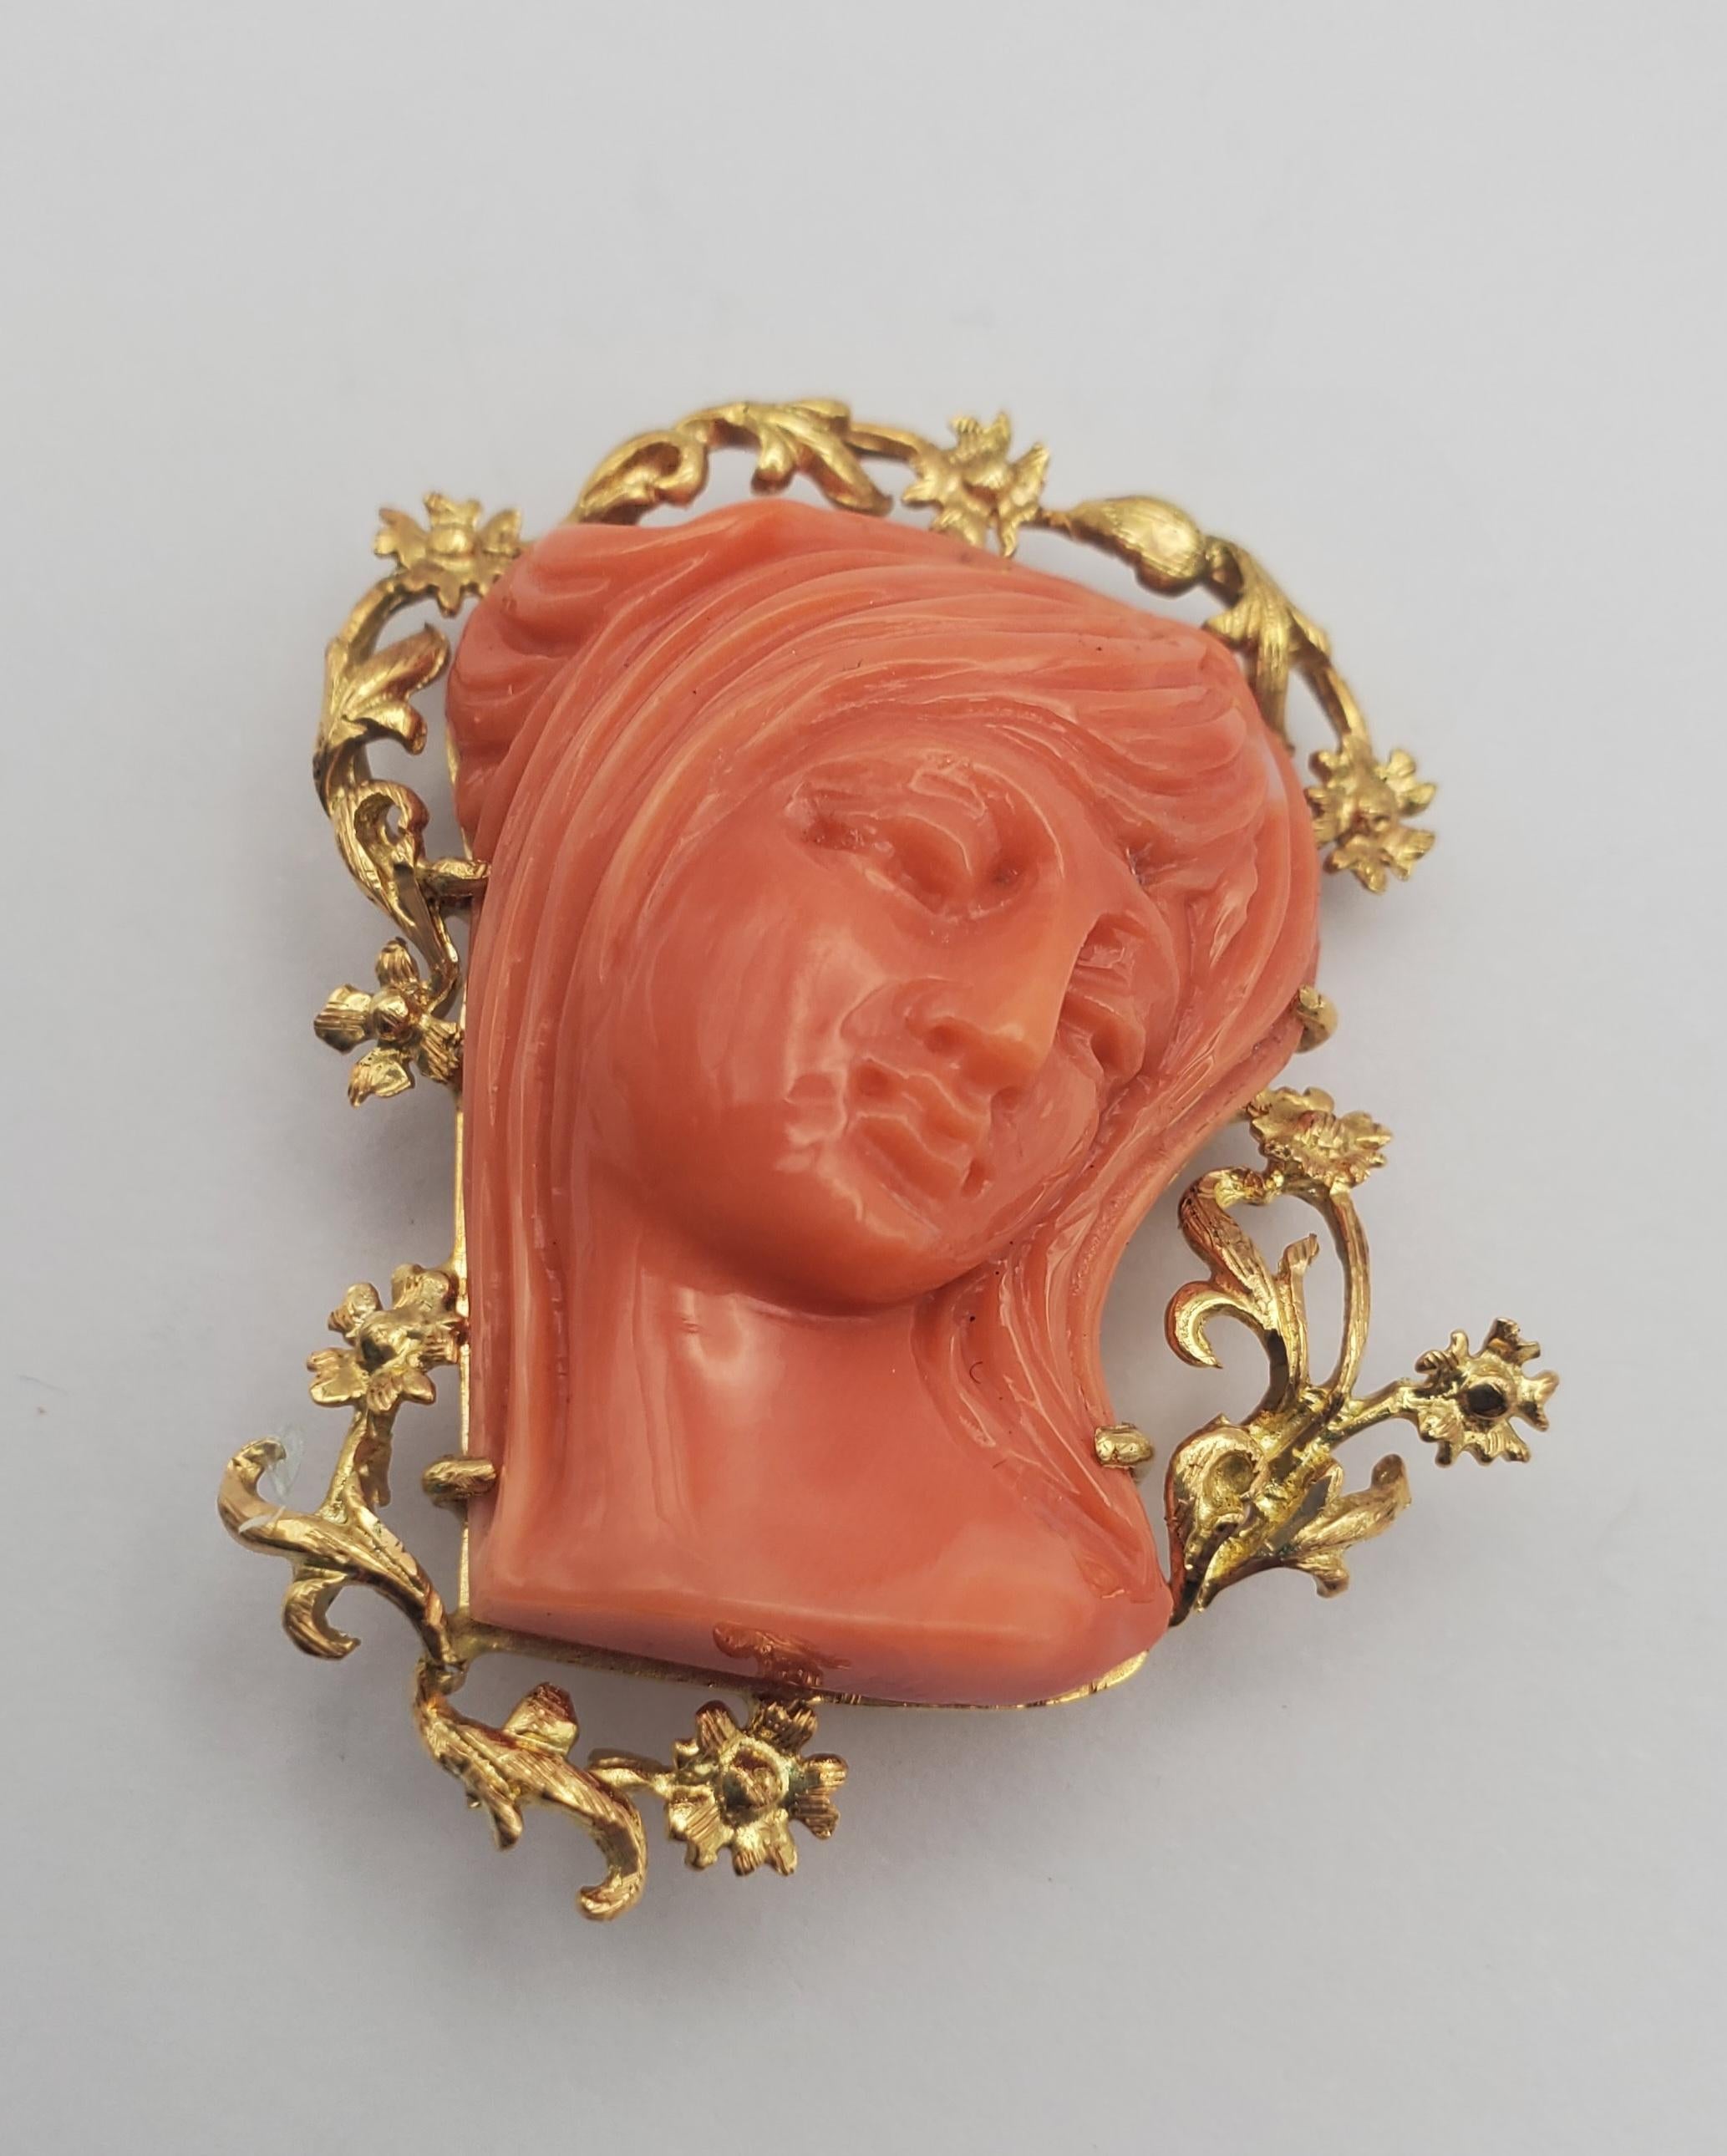 18K Yellow Gold Classic Beauty Natural Coral Cameo Convertible Pendant/Brooch from approximately the 1890s. The brooch consists of a vibrantly colored natural coral cameo wreathed with detailed flowers carved in 18k yellow. The cameo is a lovely